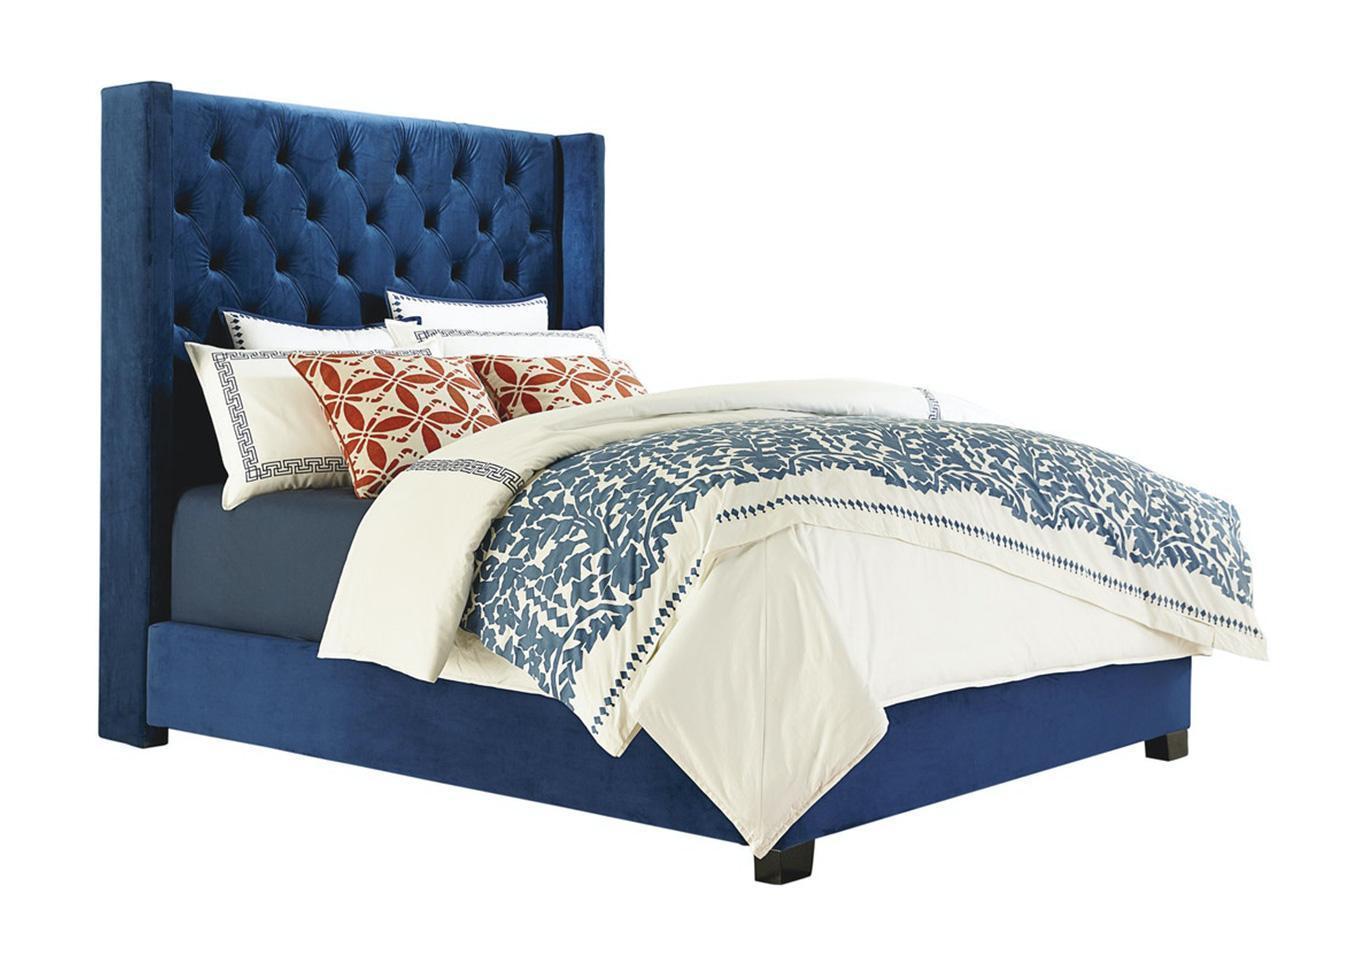 Queen Blue Upholstered Bed,T-0127018 Tax Season Savings 3-26-24